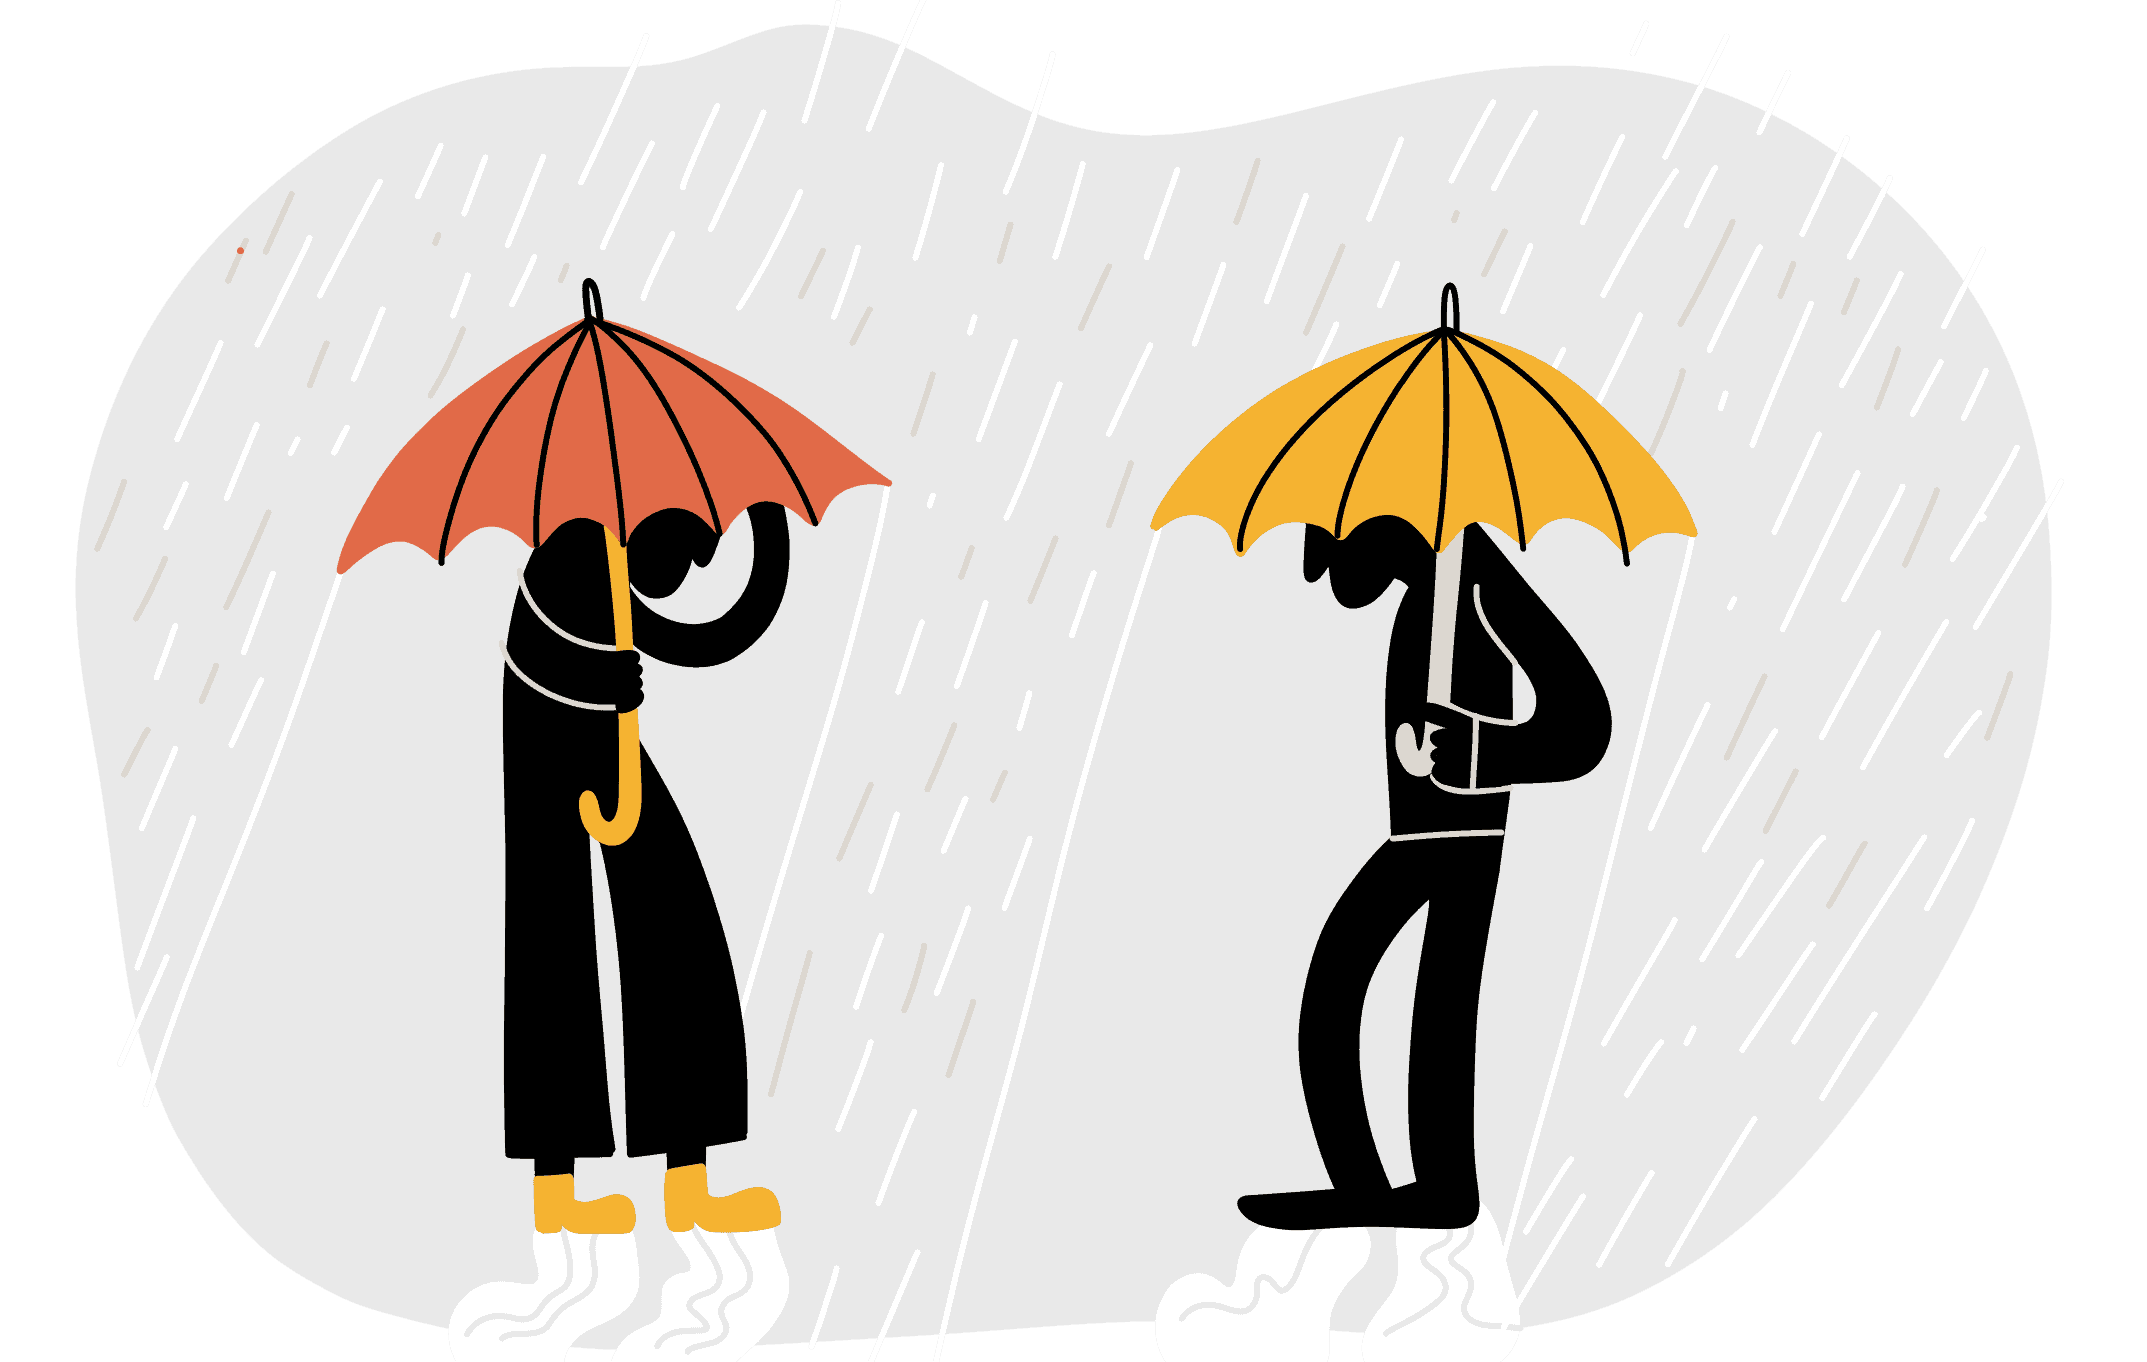 Two unhappy people greeting each other in the rain, telling white lies about how their day is going